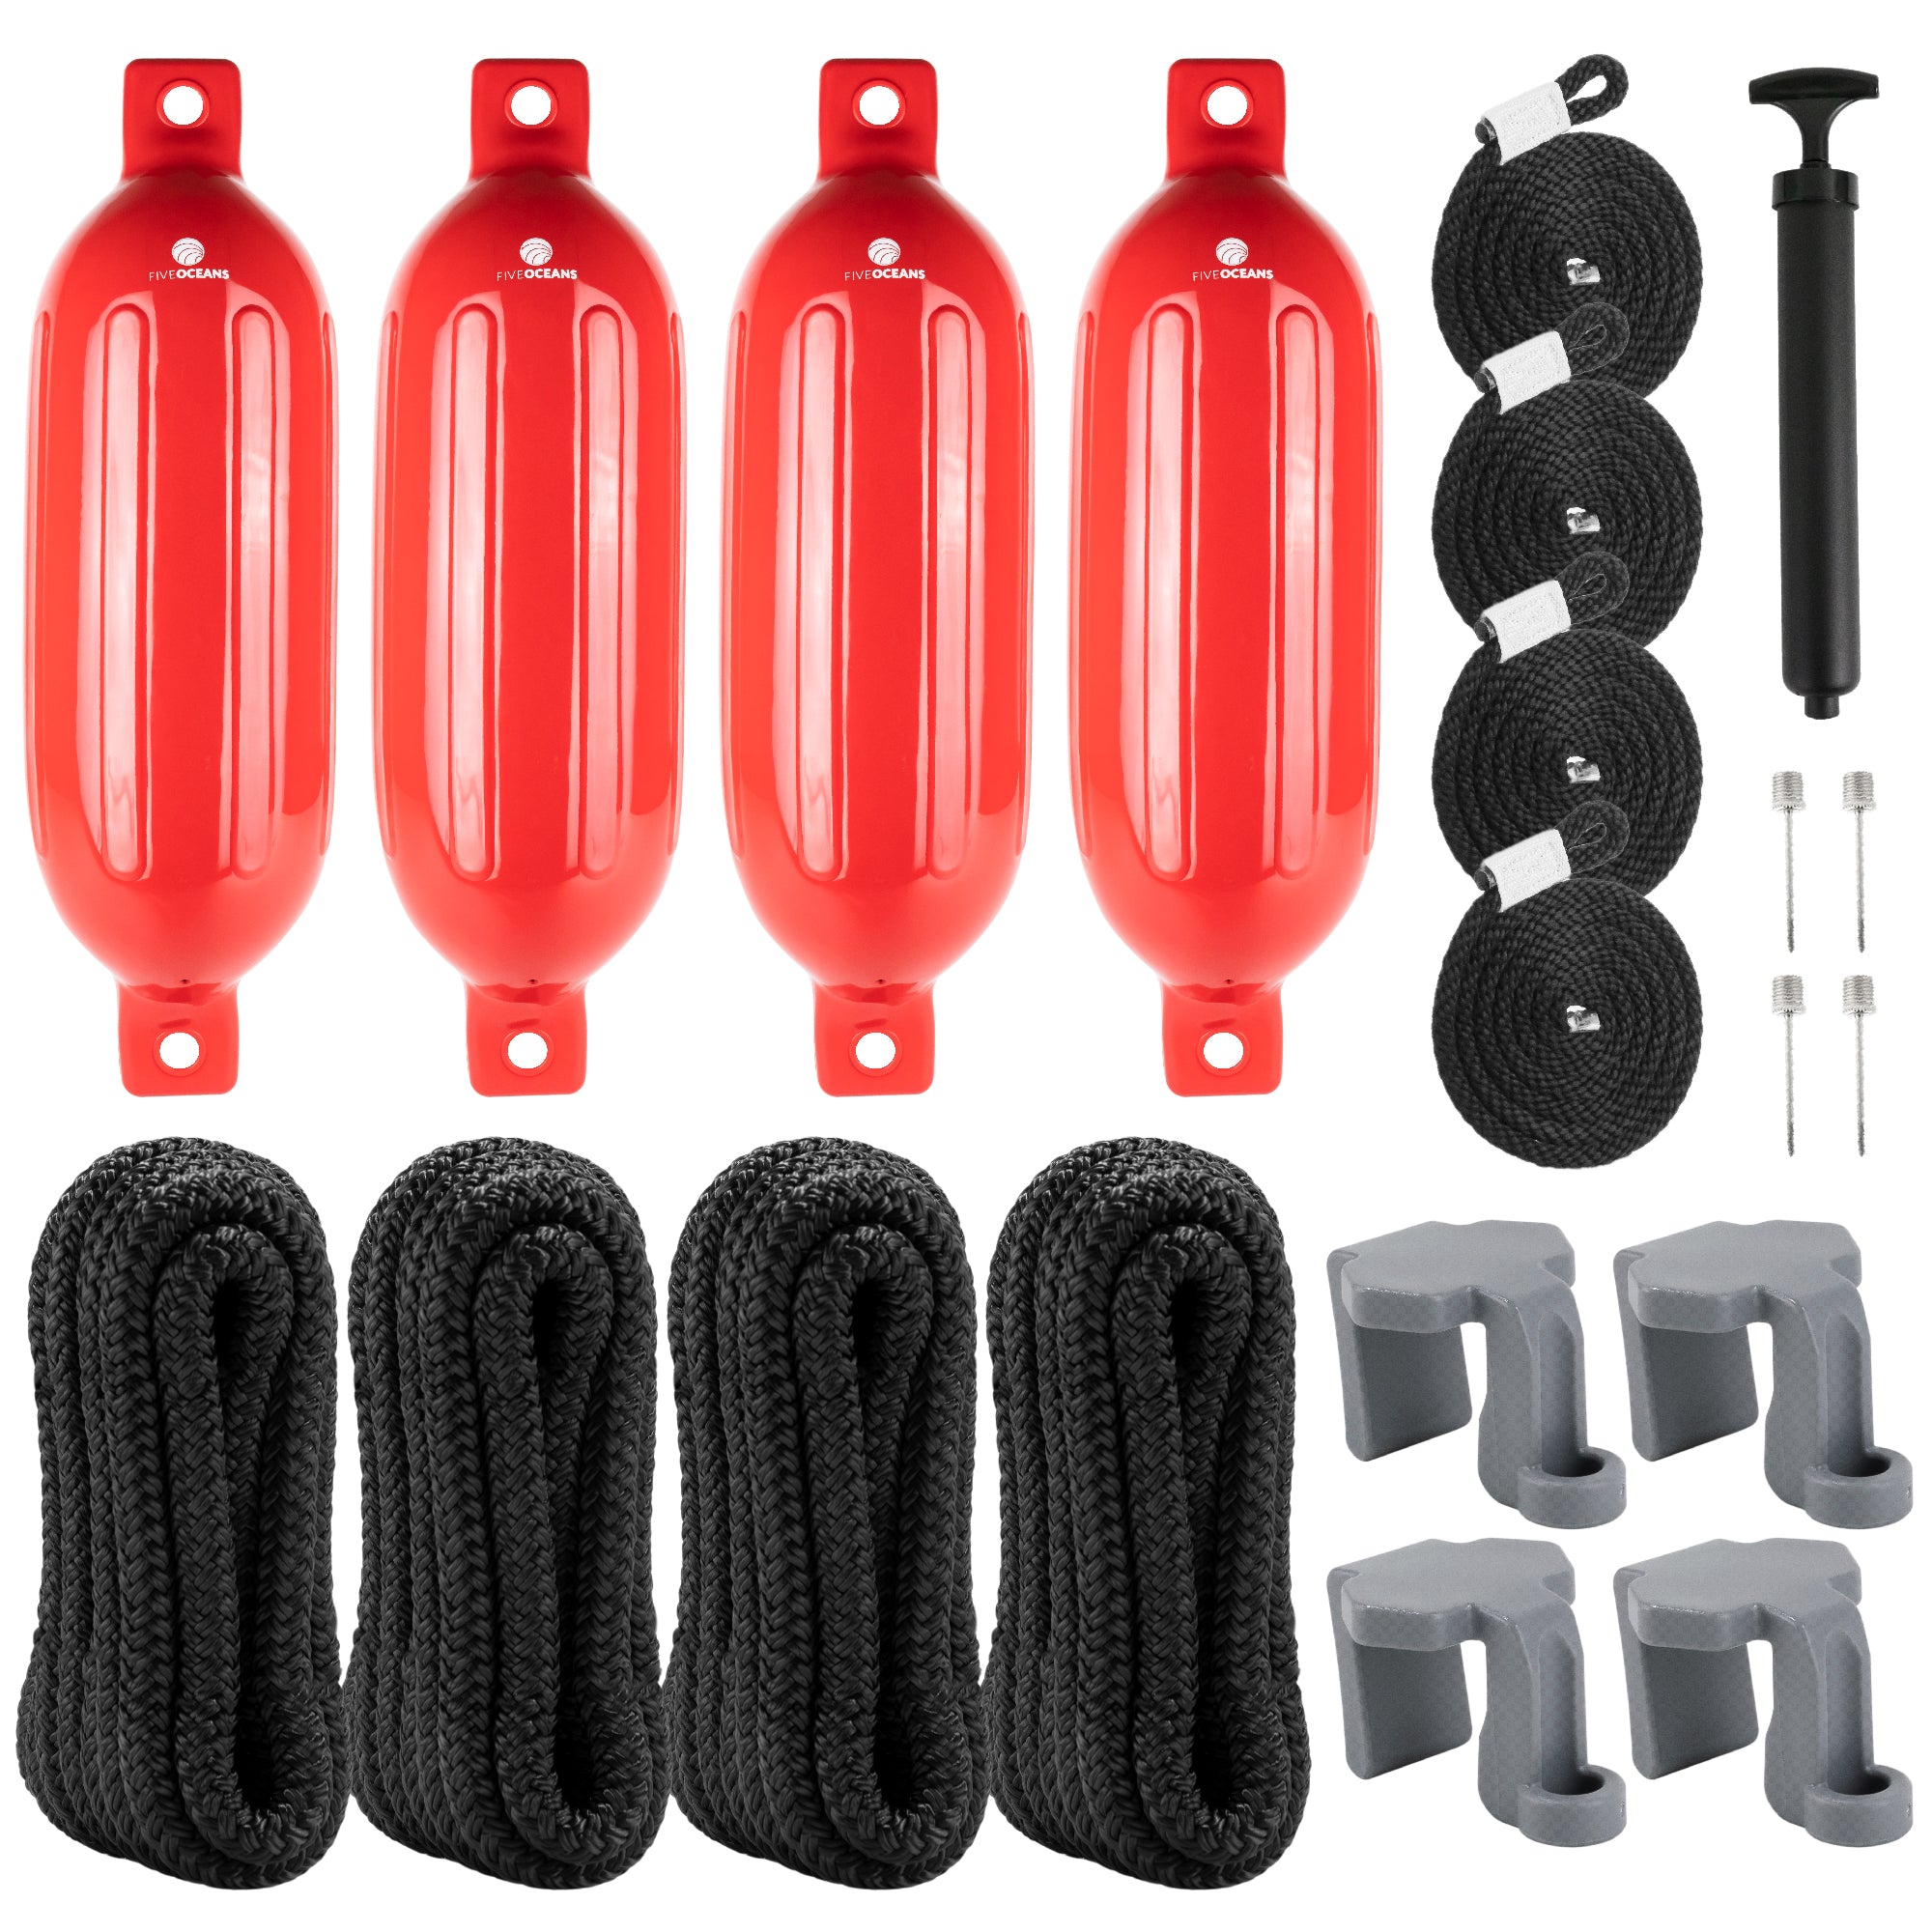 Boat Fenders Complete Set, Red 4.5" x 16", Includes Dock Lines and Fender Clips - FO4538-C1